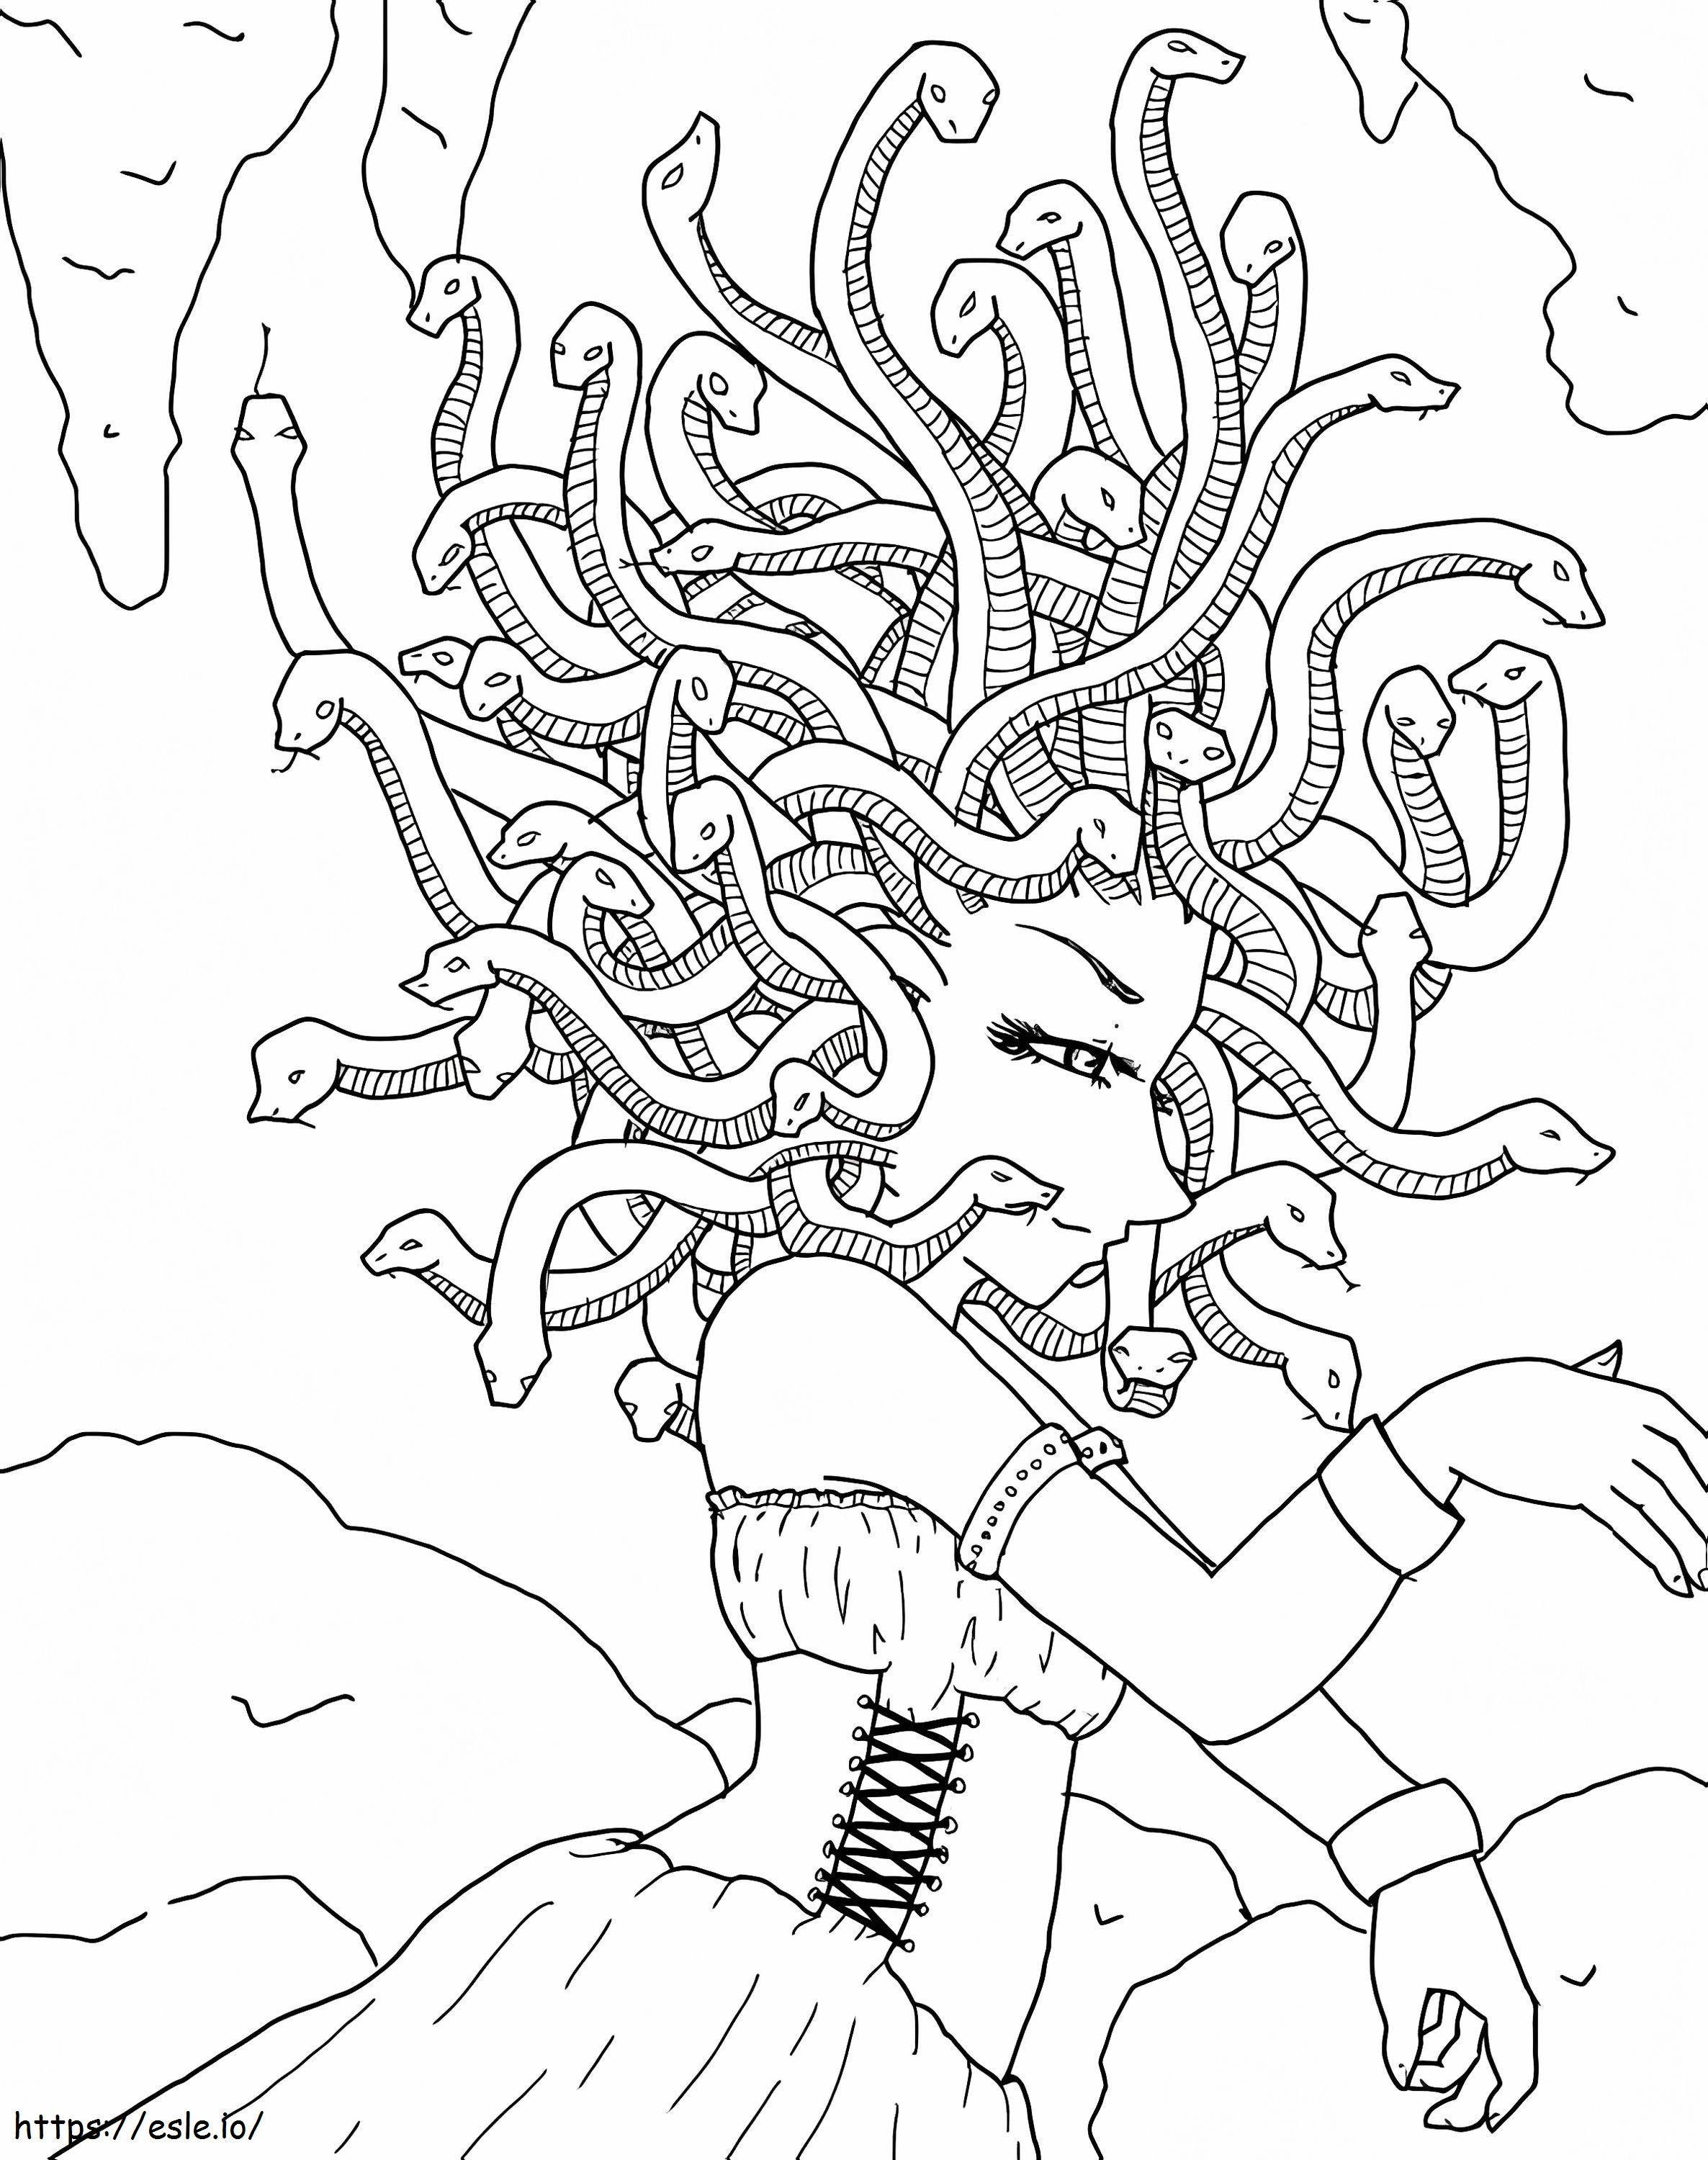 Little Jellyfish coloring page